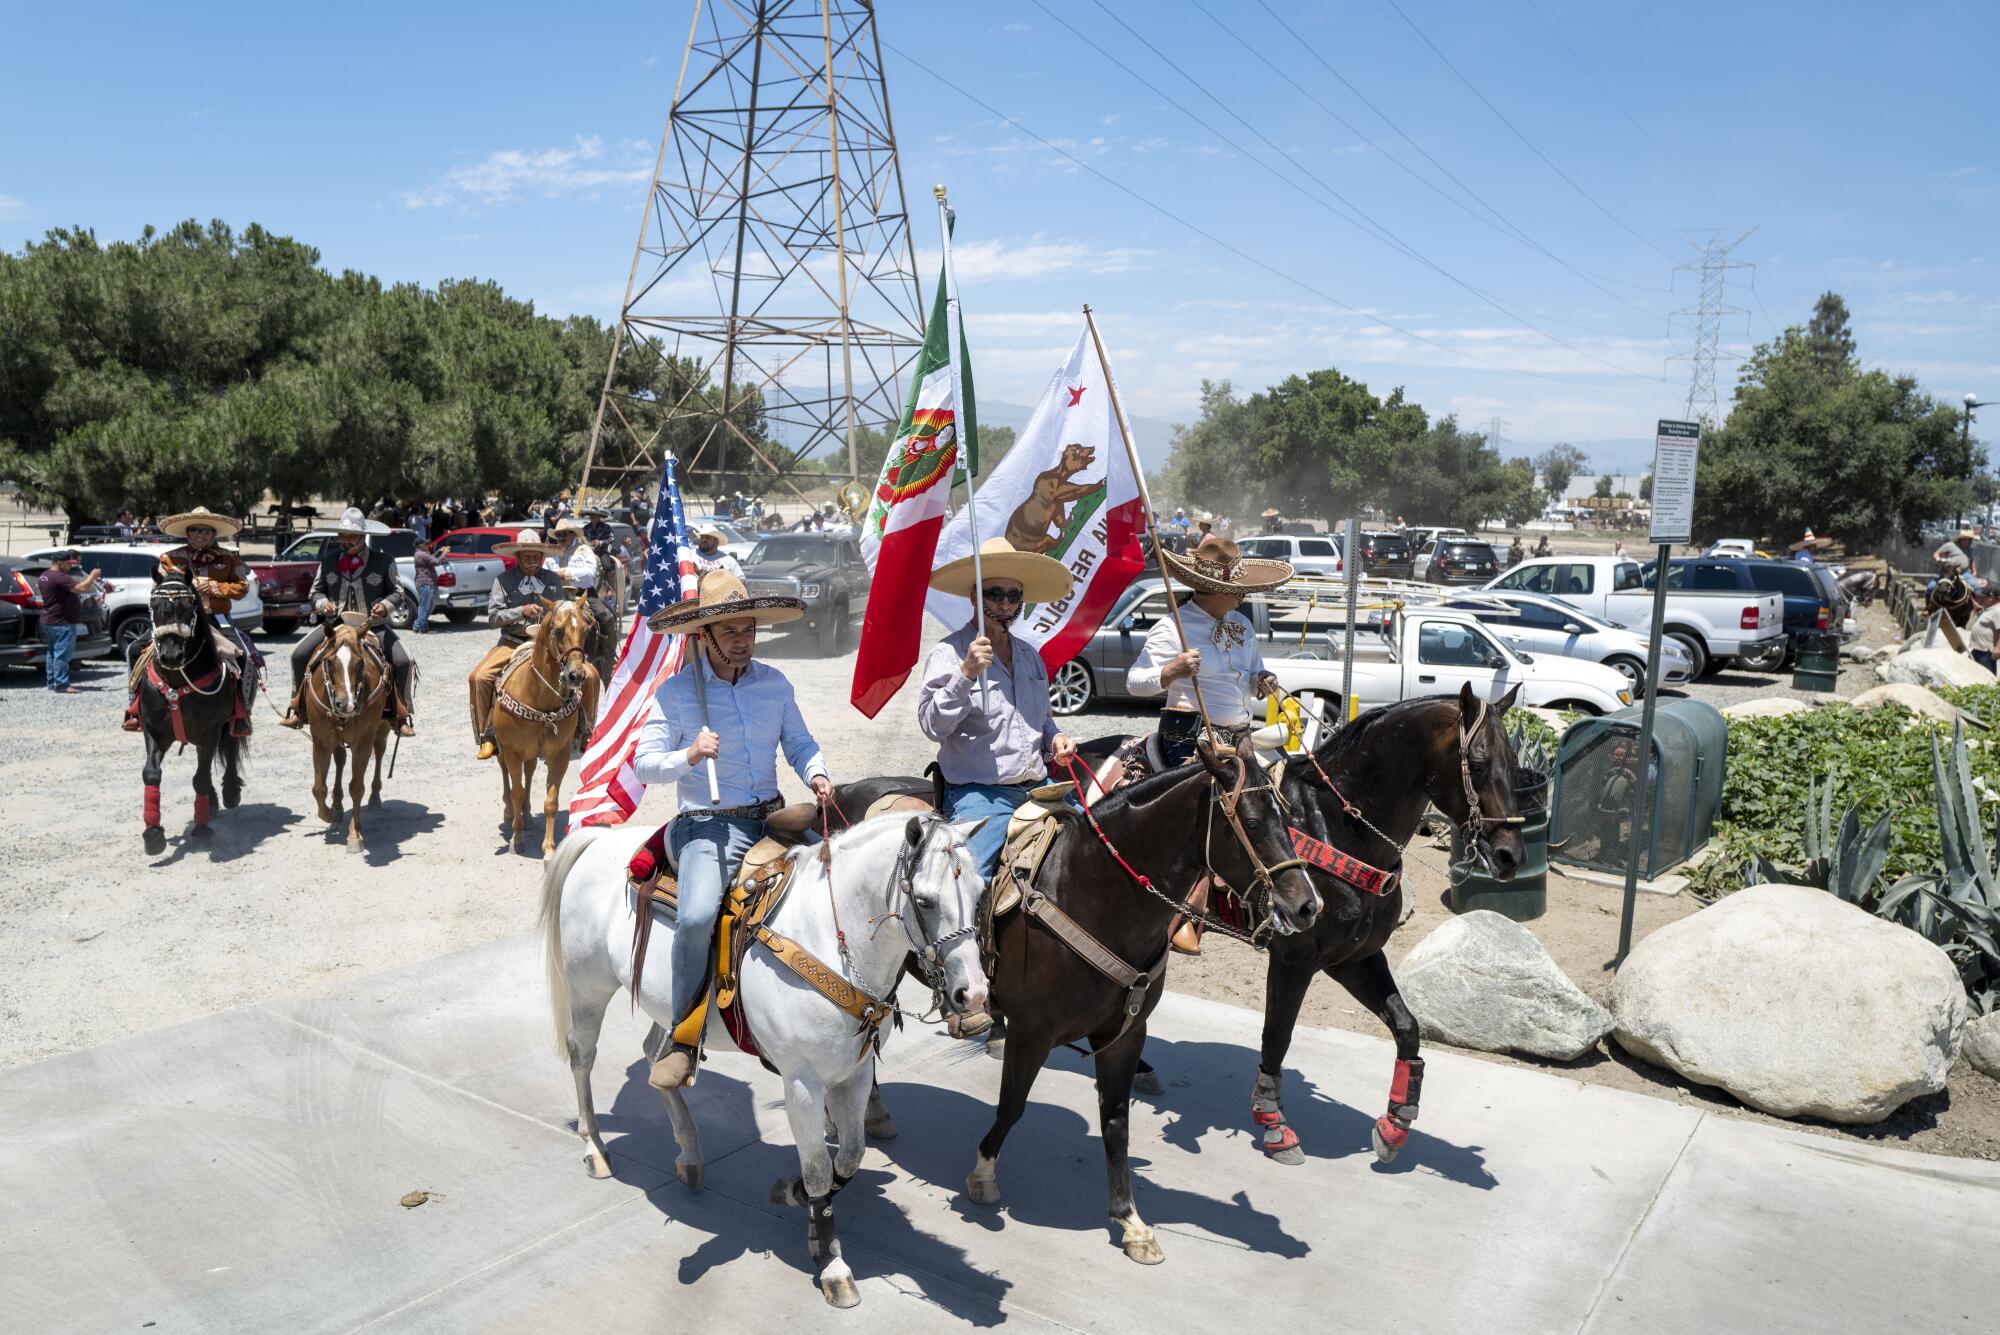 People on horses ride while carrying flags through streets.